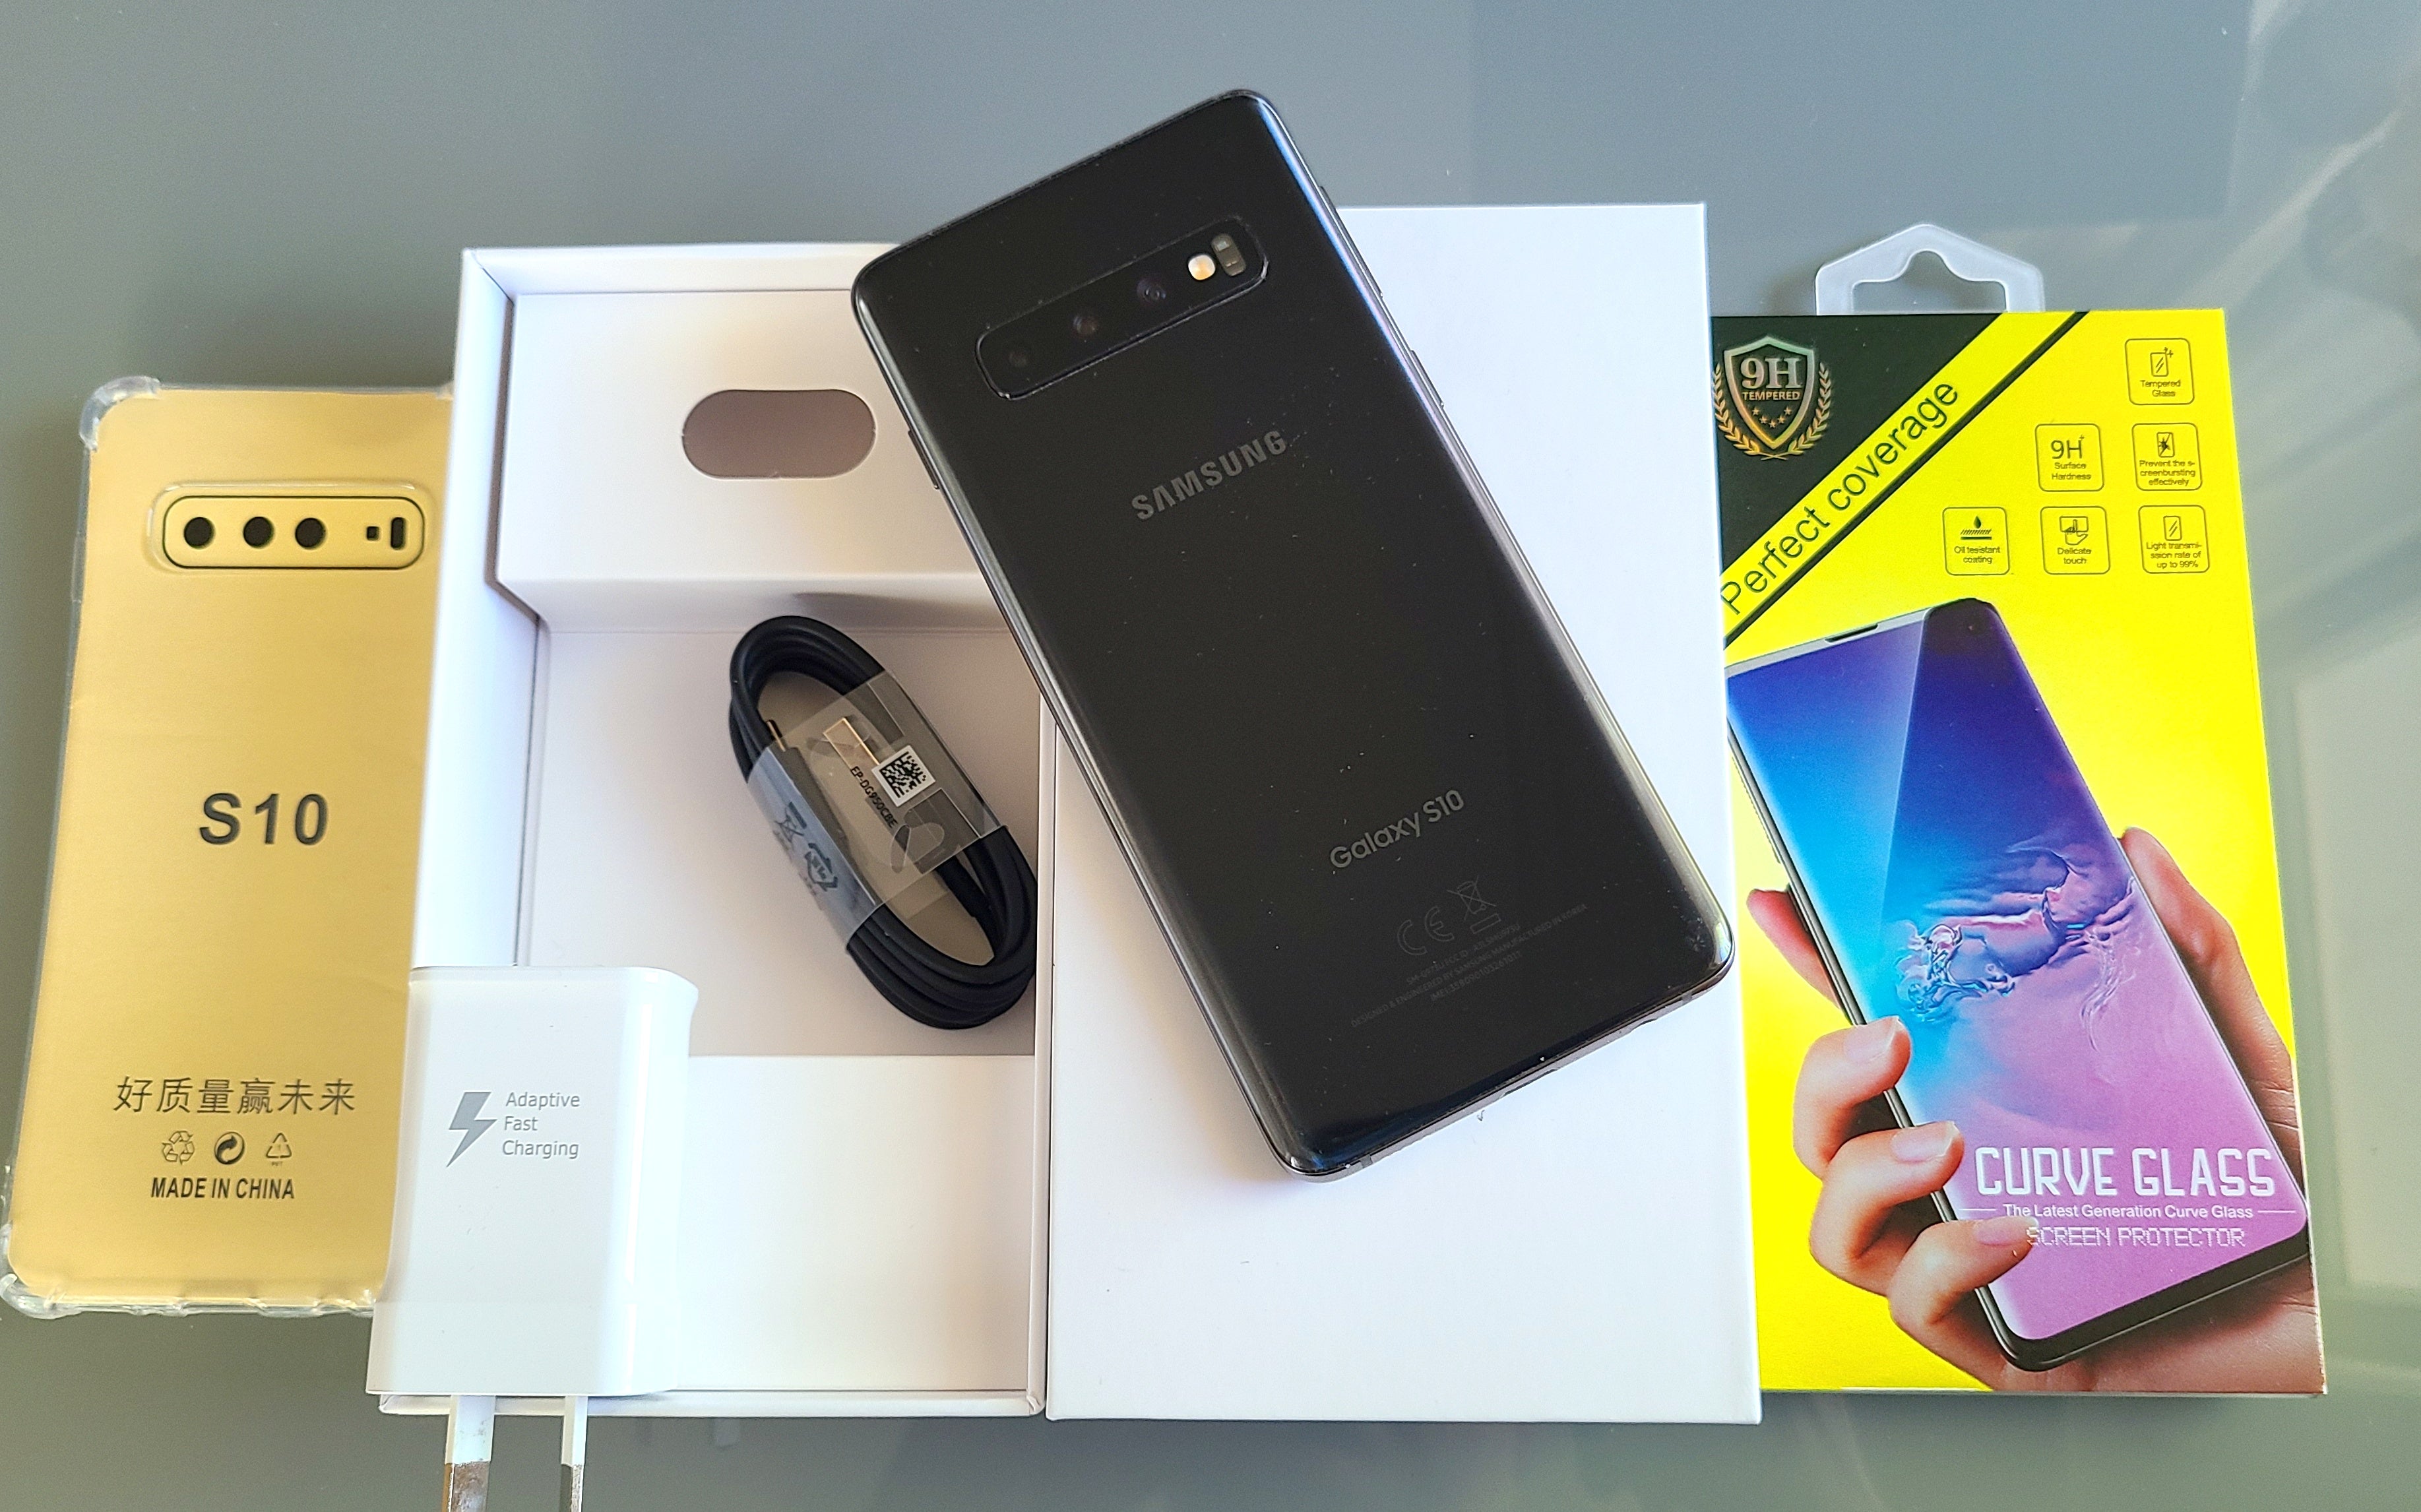 Samsung Galaxy S10 128GB 8GB Prism Black - New Case, Glass Screen Protector & Shipping  (Like New)